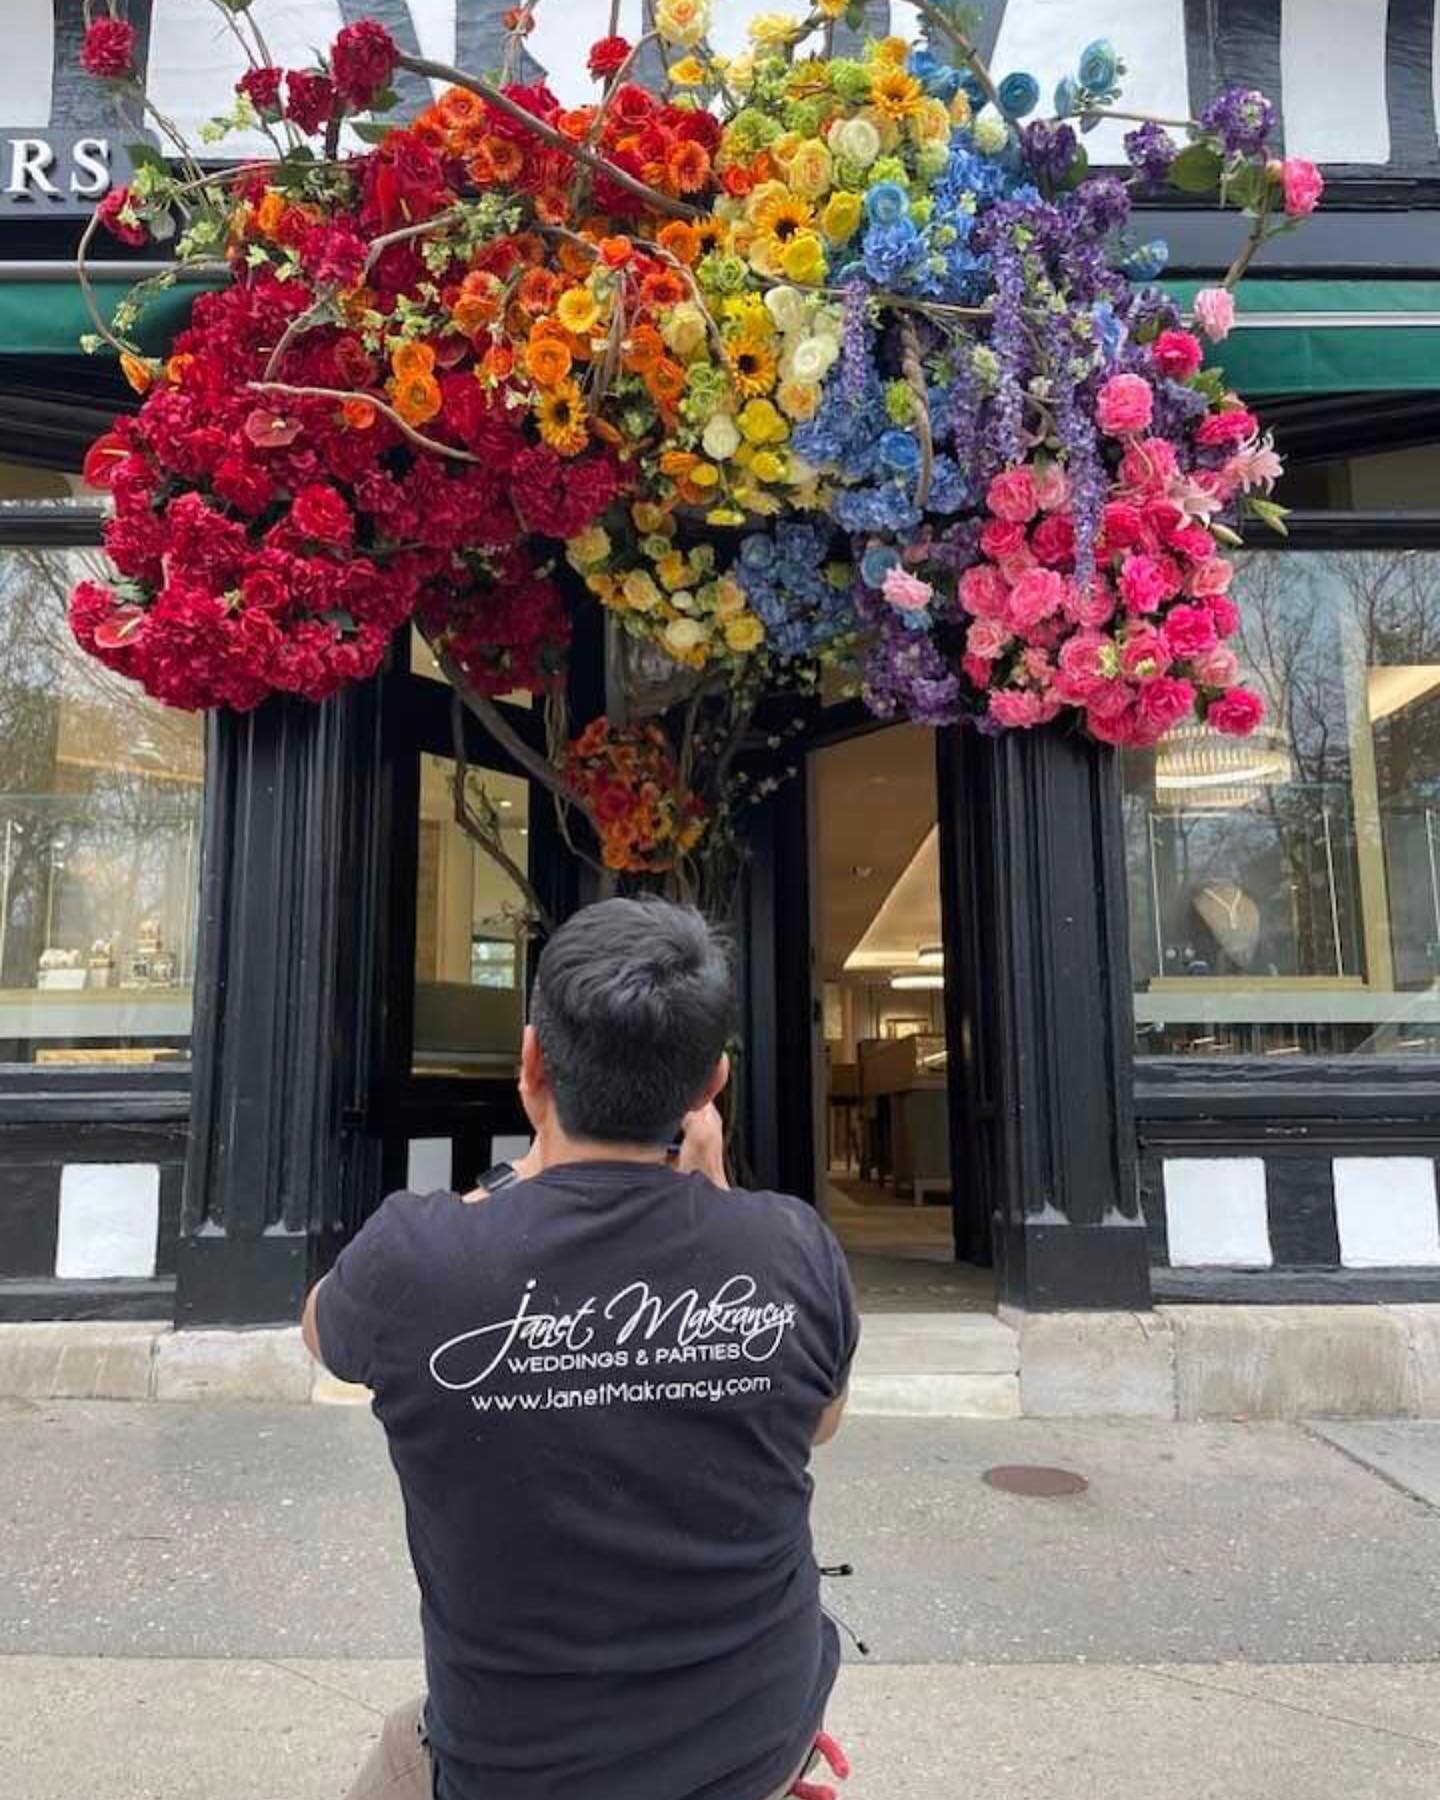 Our crew was busy today&hellip;

After a lot of work in the shop we revealed our newest creation for @hamiltonjewelers. To say we are overwhelmed with the opportunity to deliver again, with something so beautiful, for a town we love so much, is an un